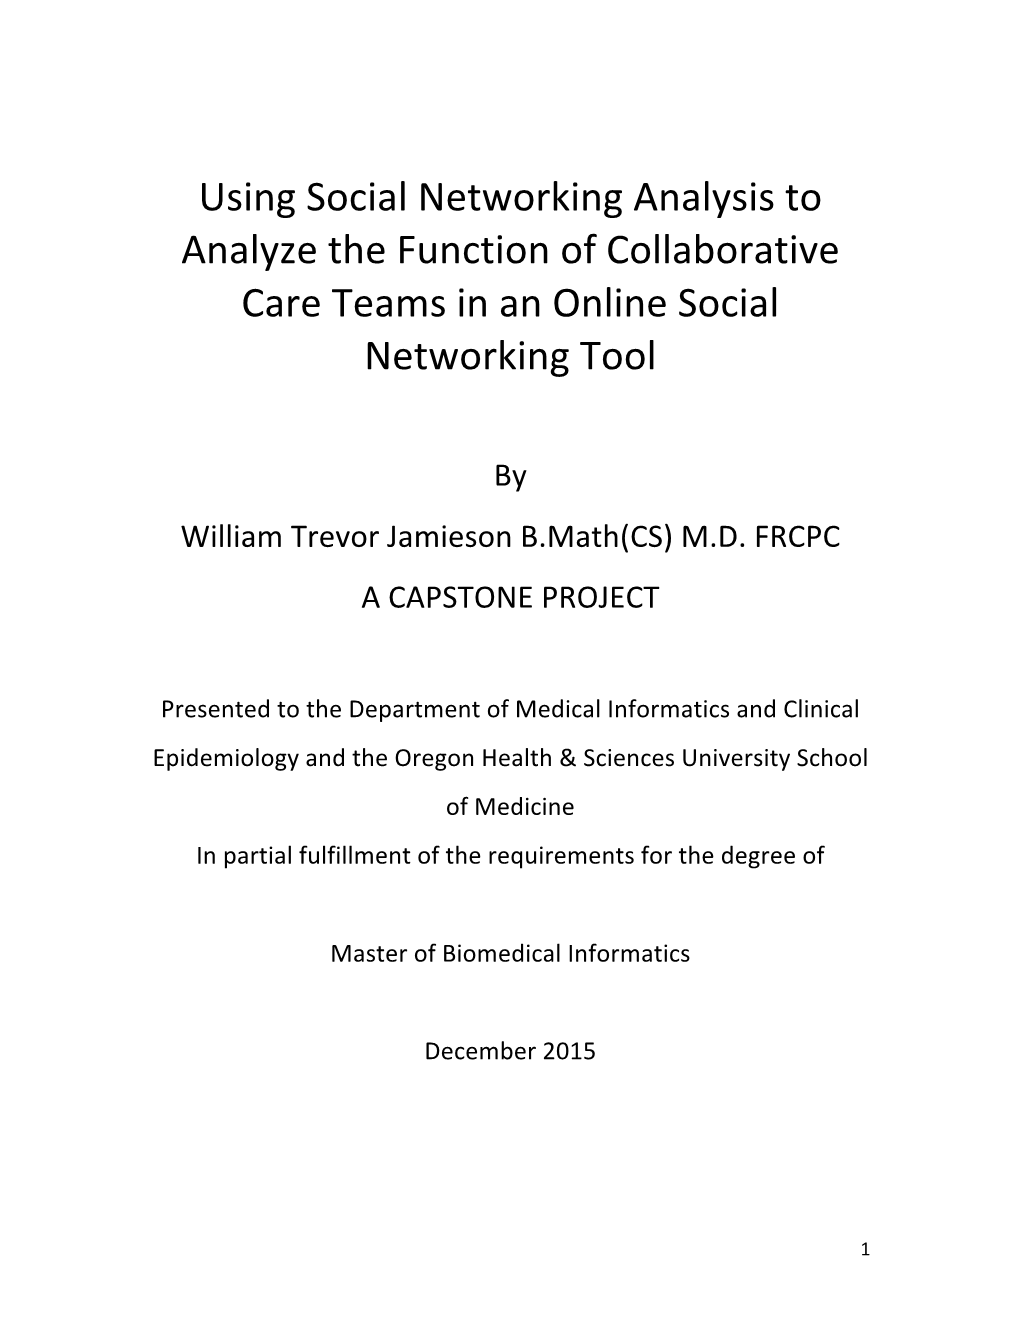 Social Networking Analysis to Analyze the Function of Collaborative Care Teams in an Online Social Networking Tool